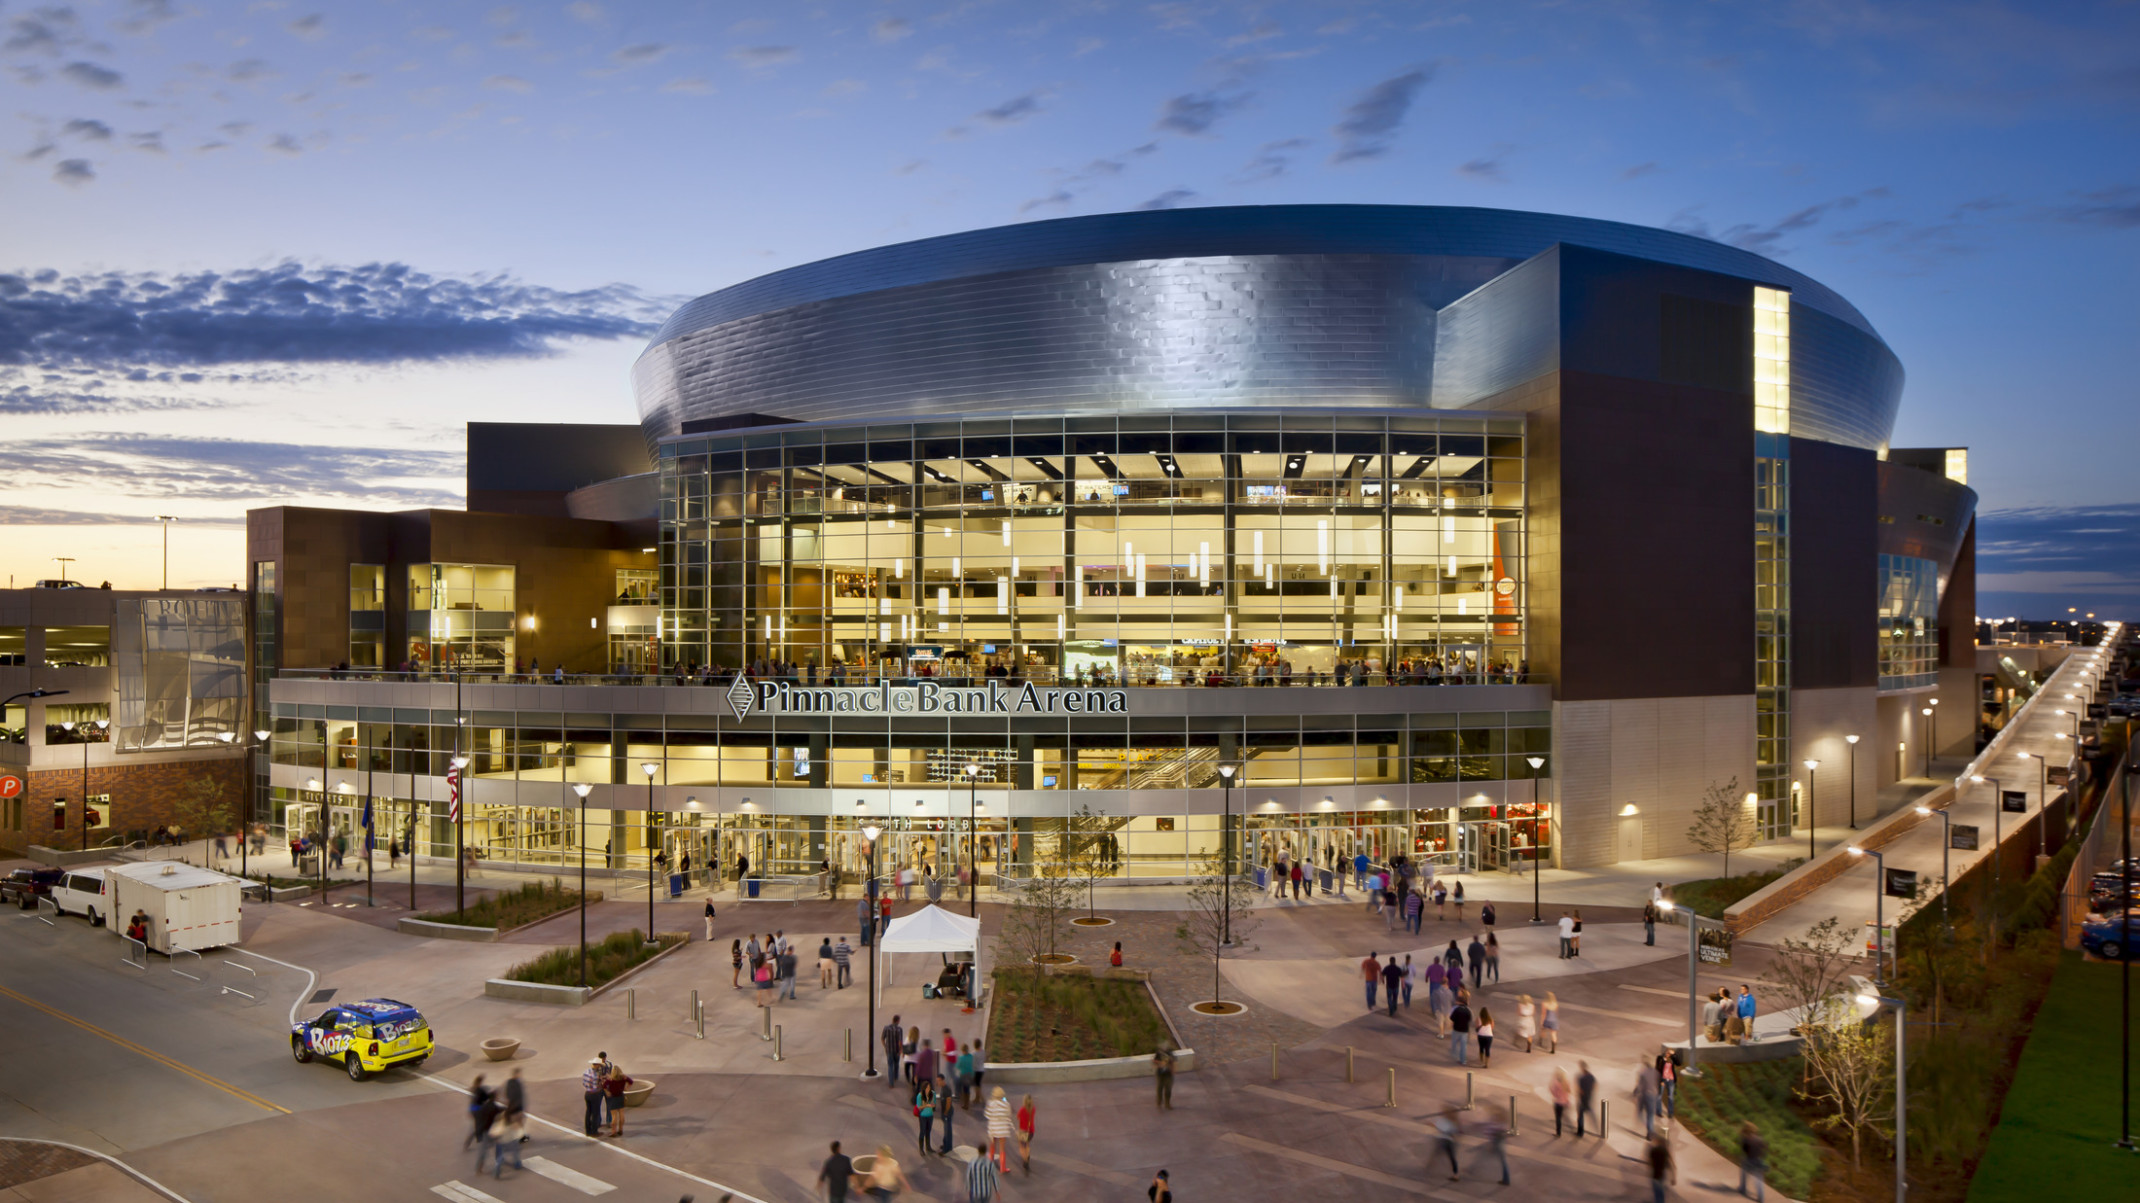 Exterior of Pinnacle Bank Arena in Lincoln Nebraska, a rounded multi story building with large windows and silver roof